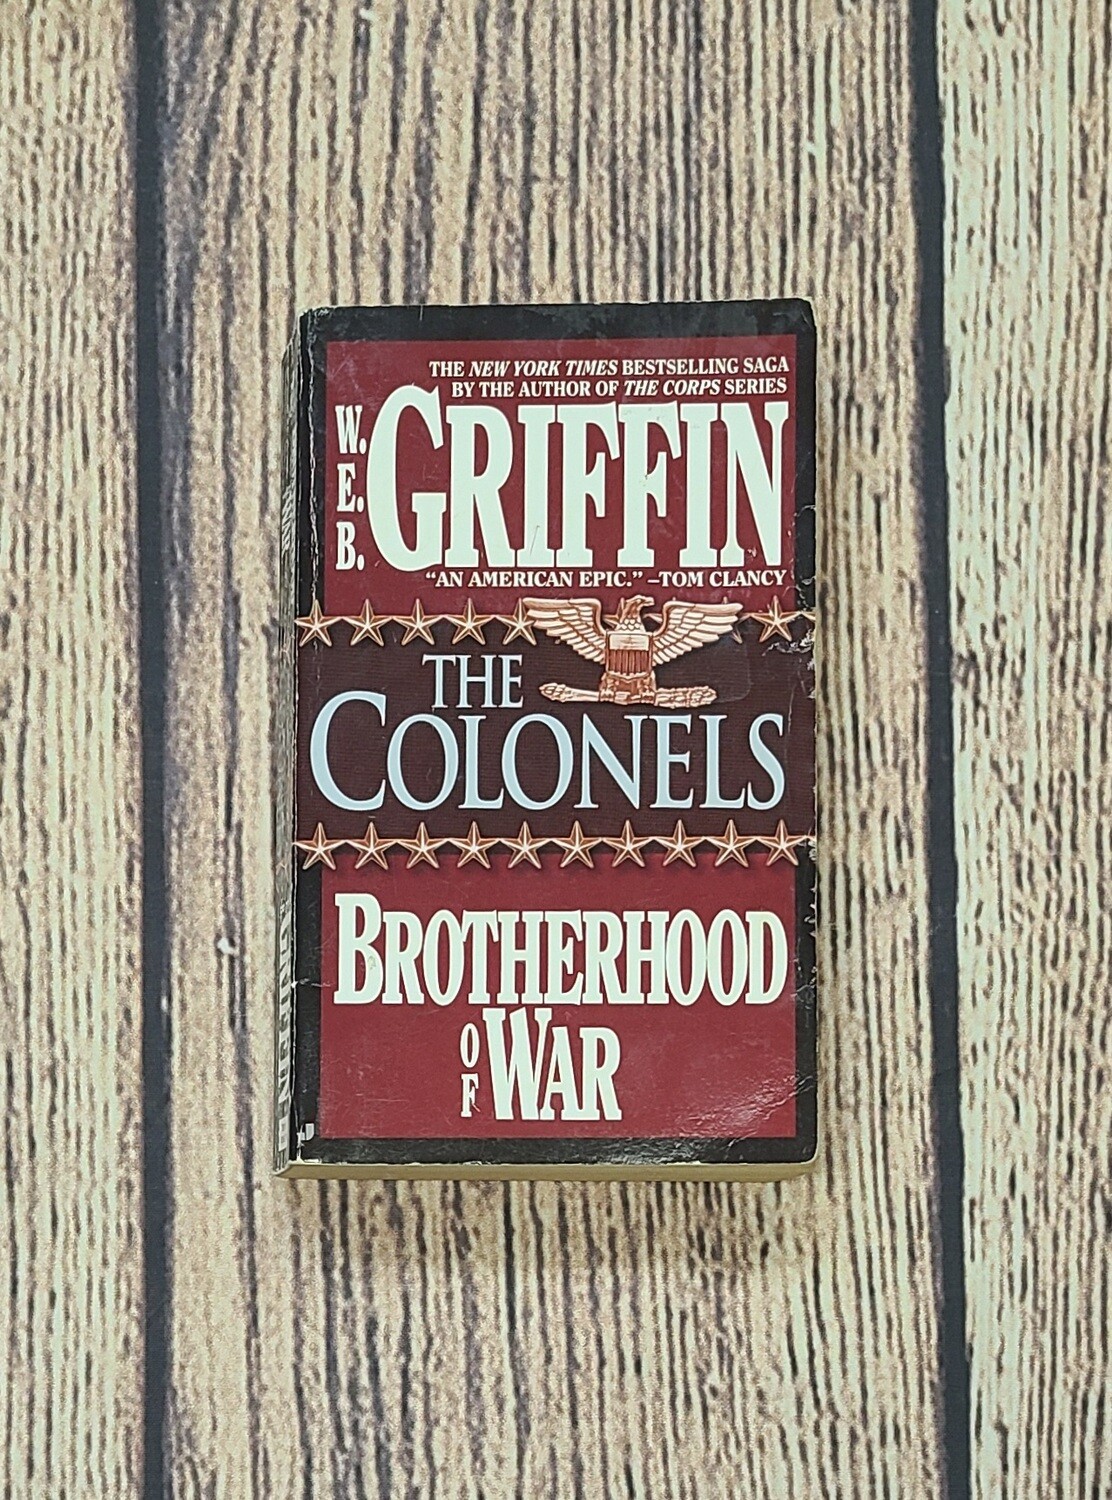 Brotherhood of War: The Colonels by W.E.B. Griffin